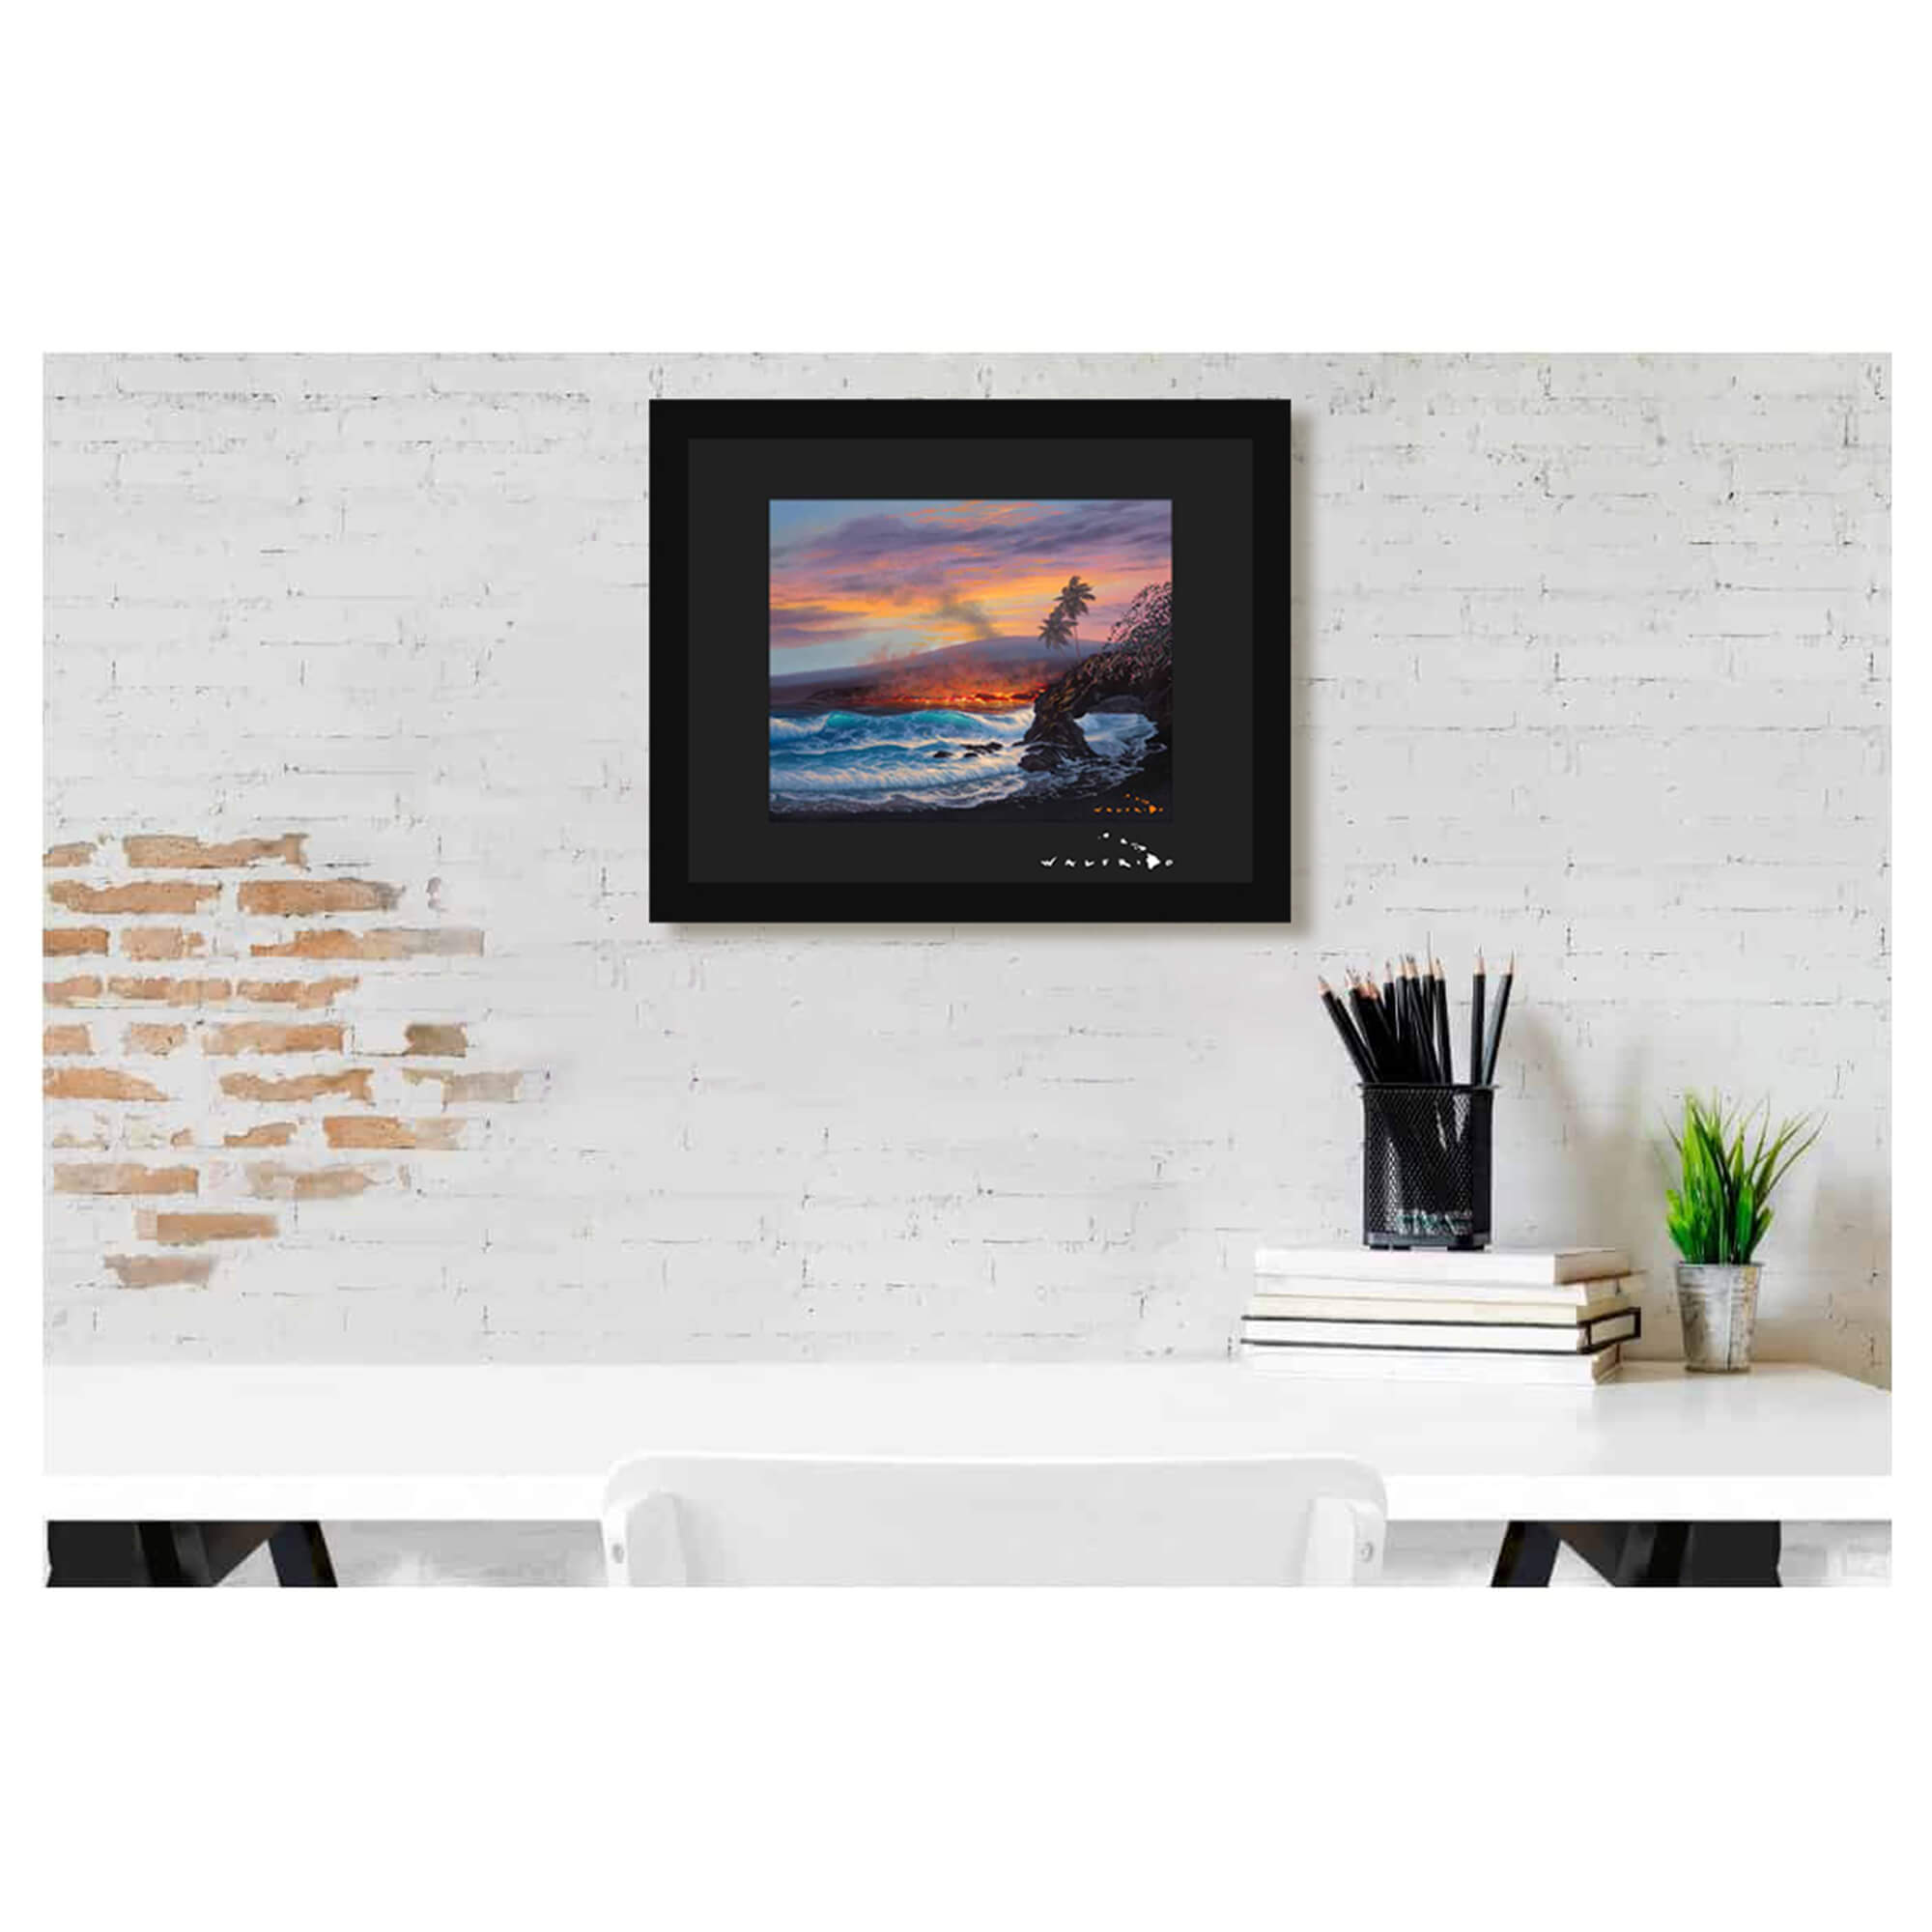 Matted art print of lava flowing into the ocean at sunset while sending up steam into the air by Hawaii artist Walfrido Garcia